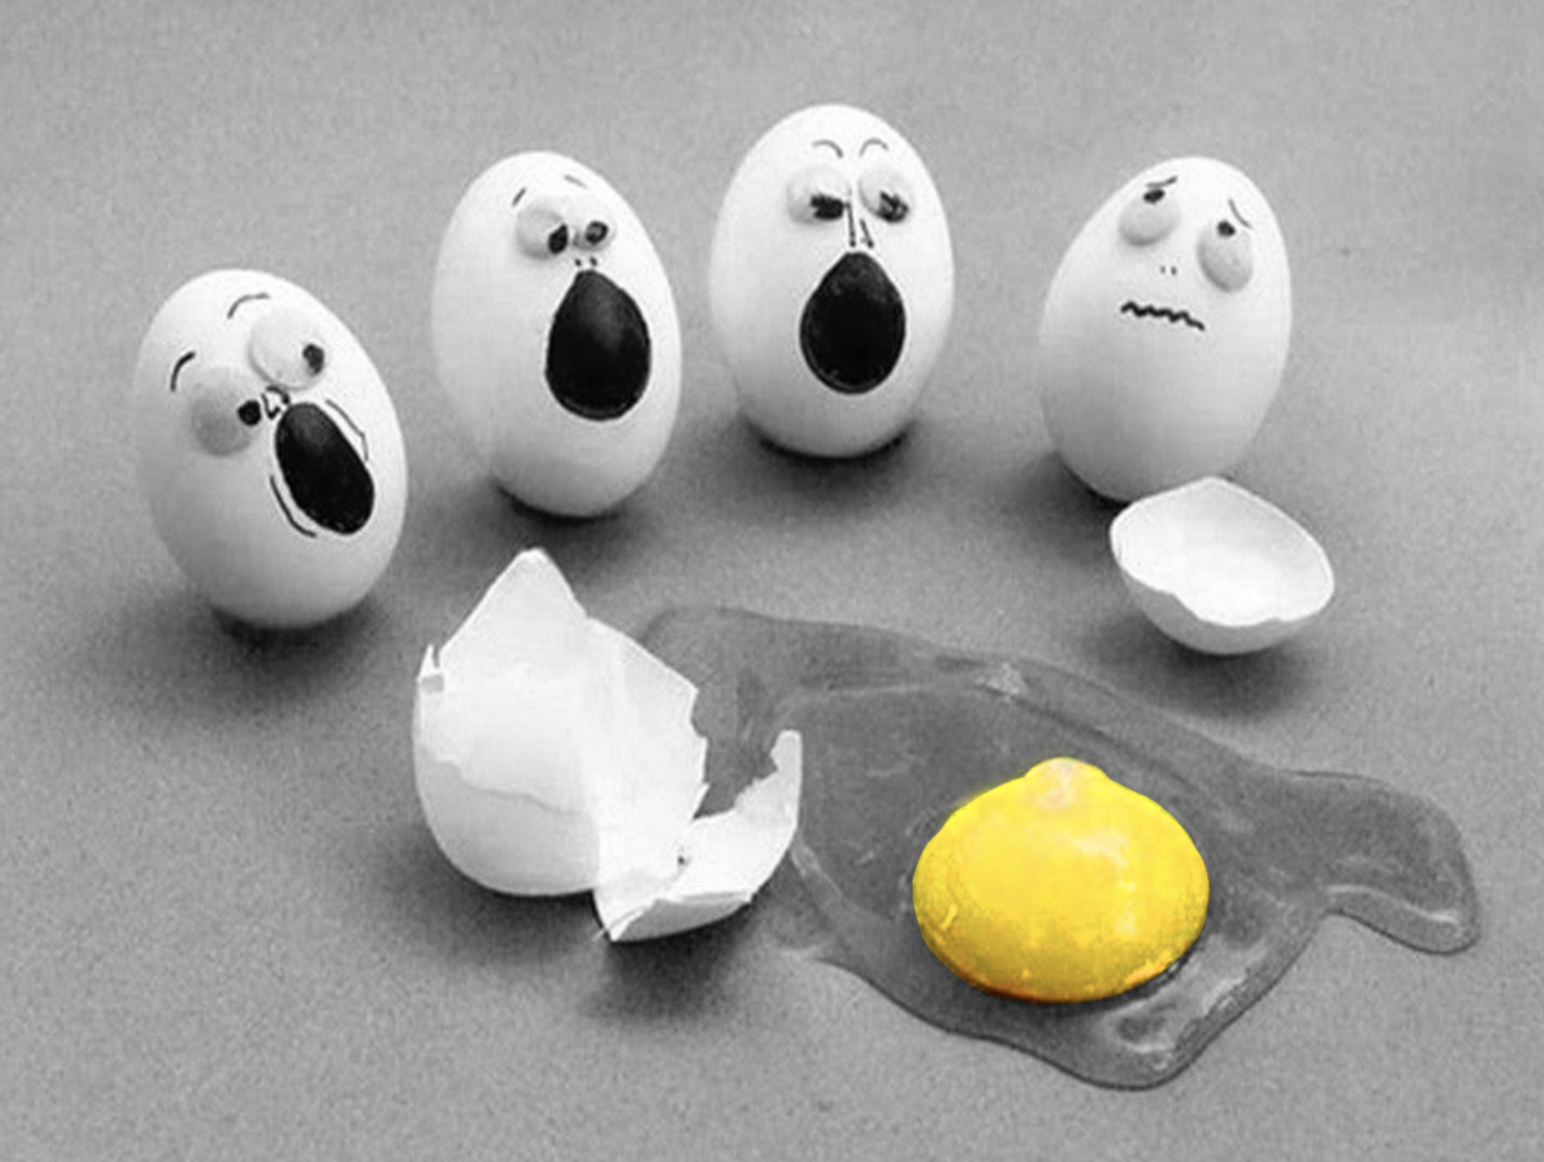 Photo of eggs with faces of shock and surprise drawn on them. THey are "looking" at a cracked egg with the yolk on the ground. It's a silly joke that they are looking at their "cracked open" friend.